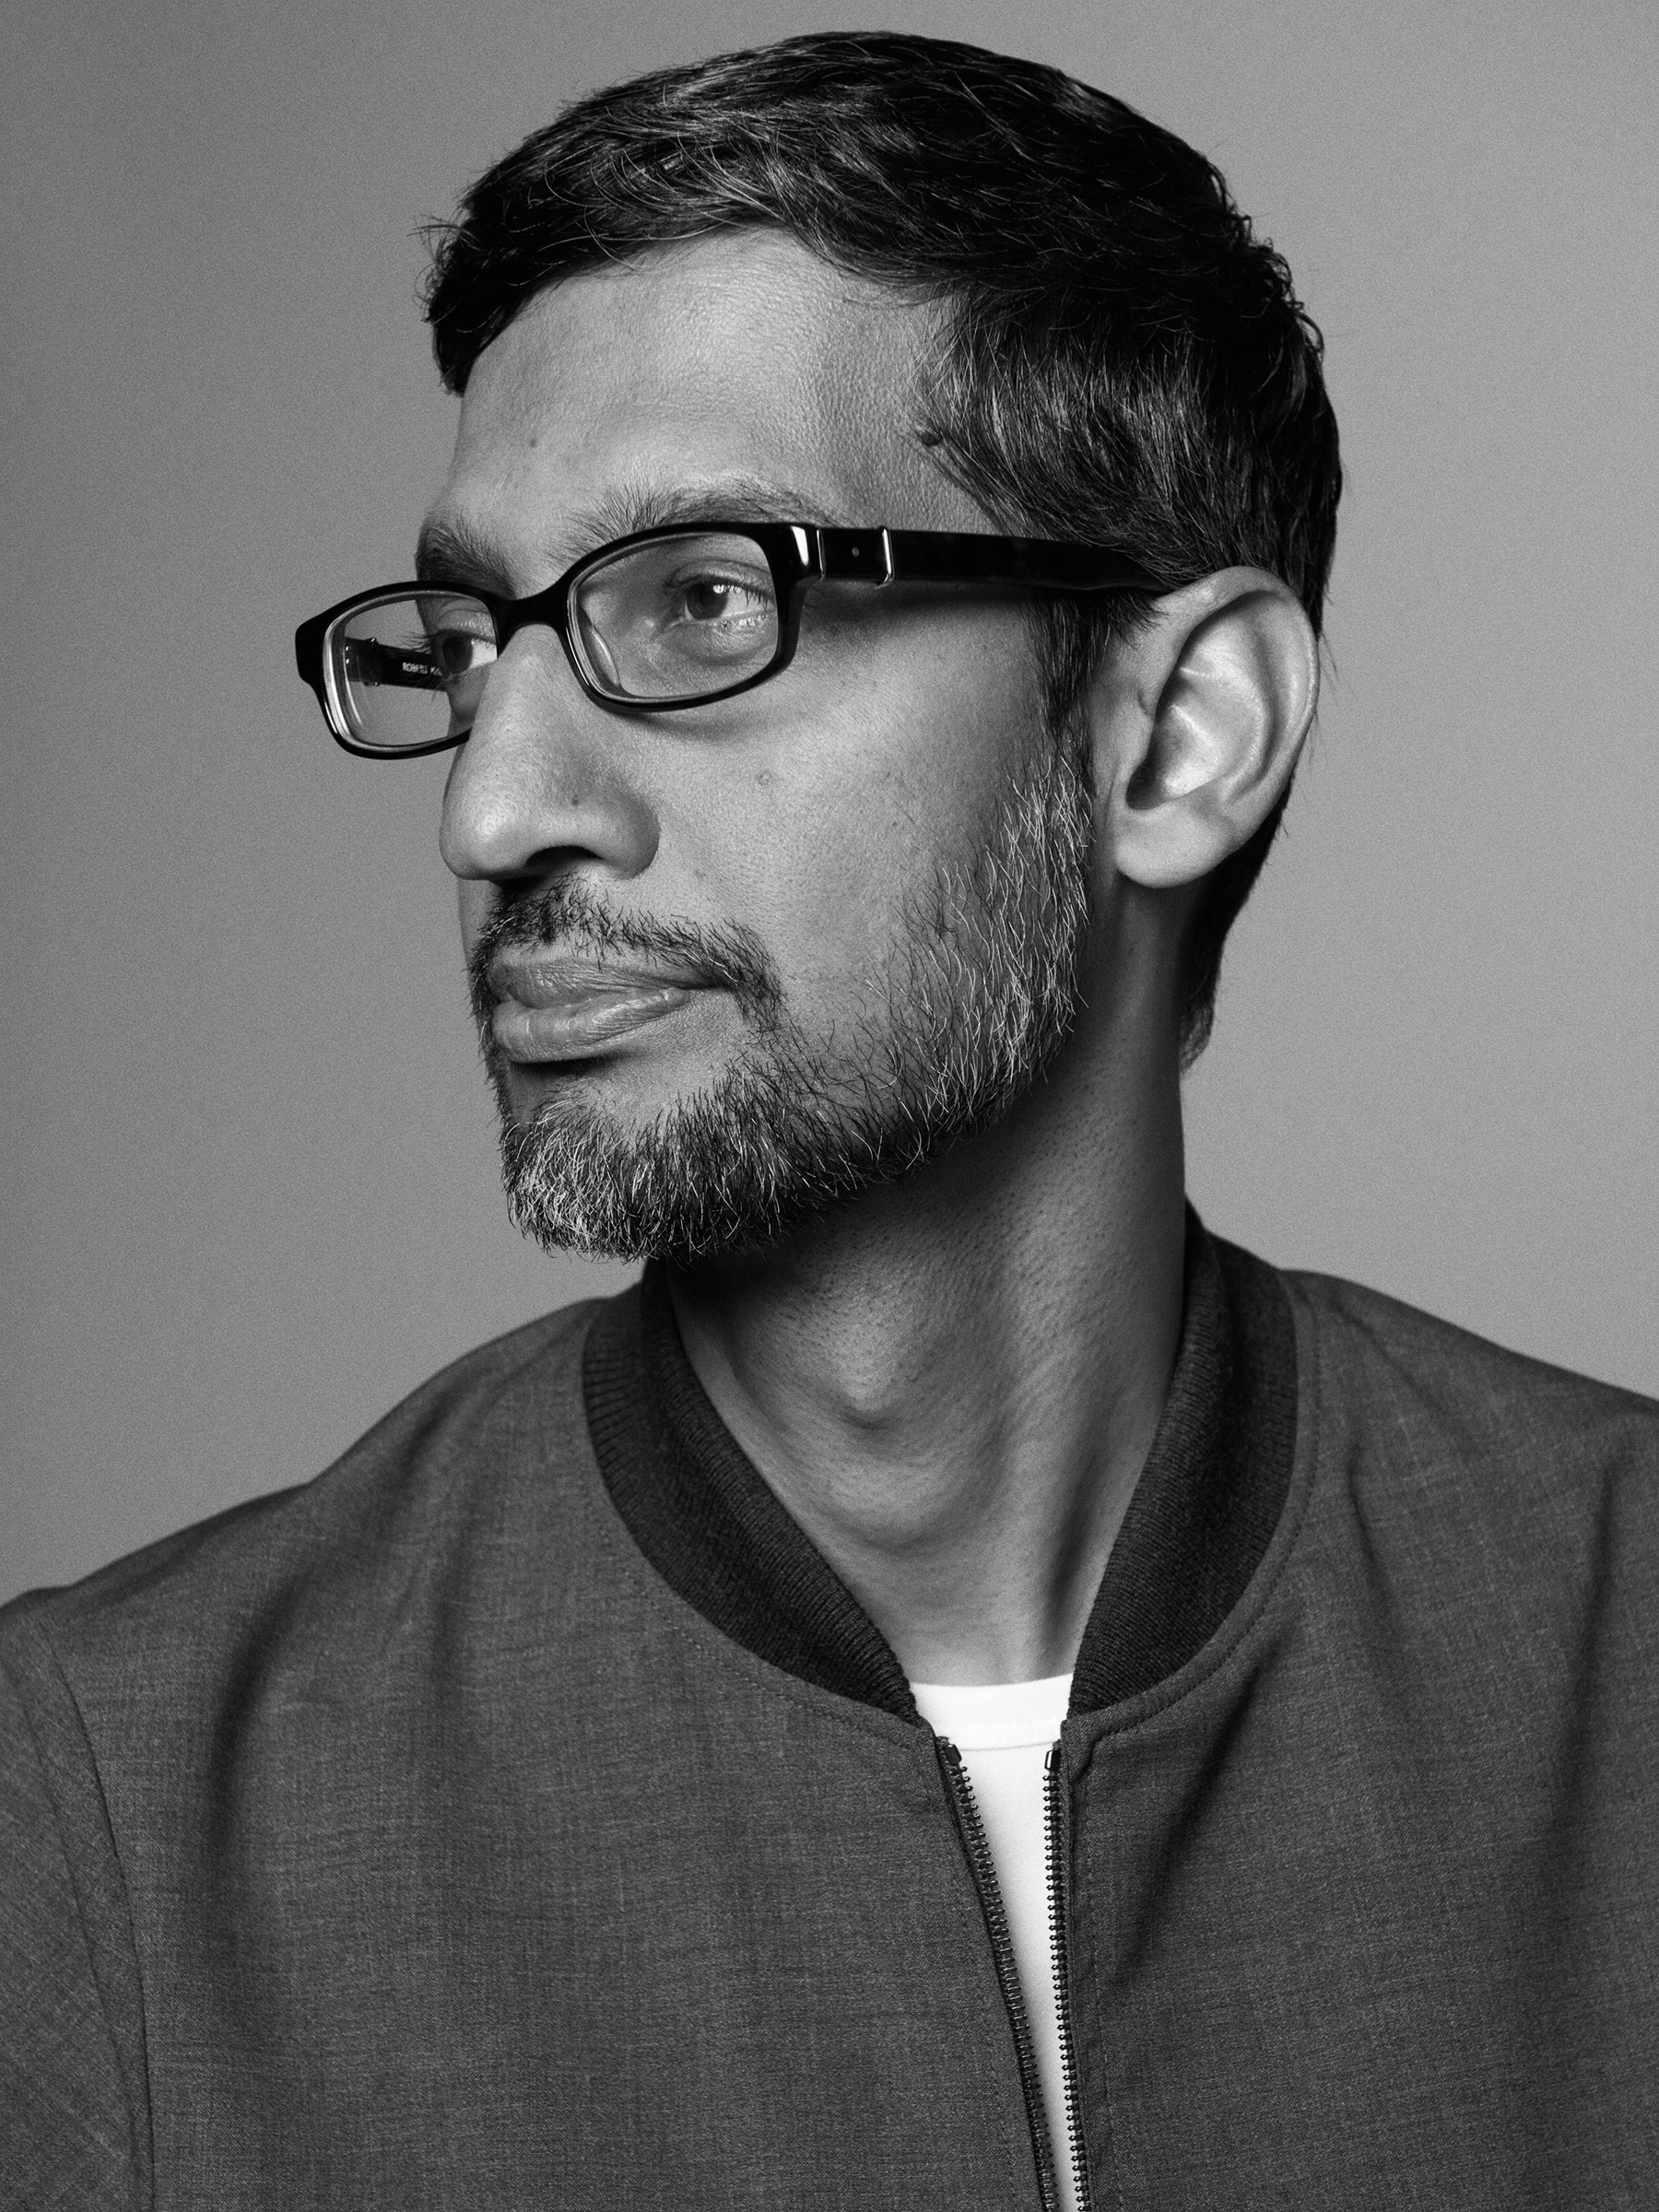 Sundar Pichai, CEO of Google, photographed at the Googleplex in Mountainview, Calif. on March 11, 2020. (Paola Kudacki for TIME)